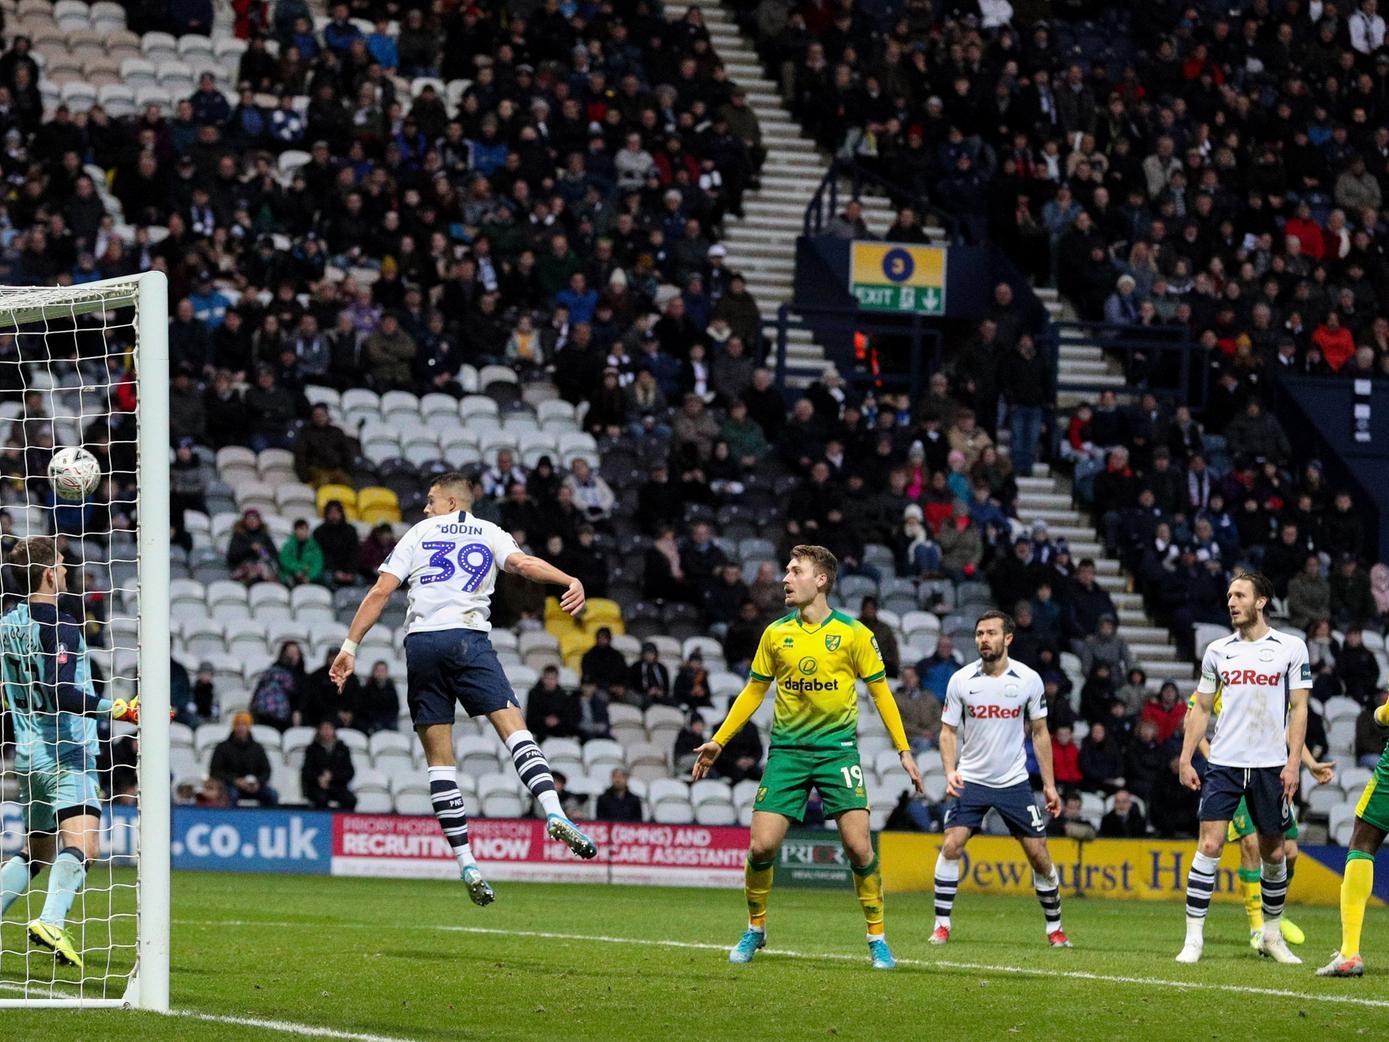 Billy Bodin heads PNE's first goal against Norwich at Deepdale